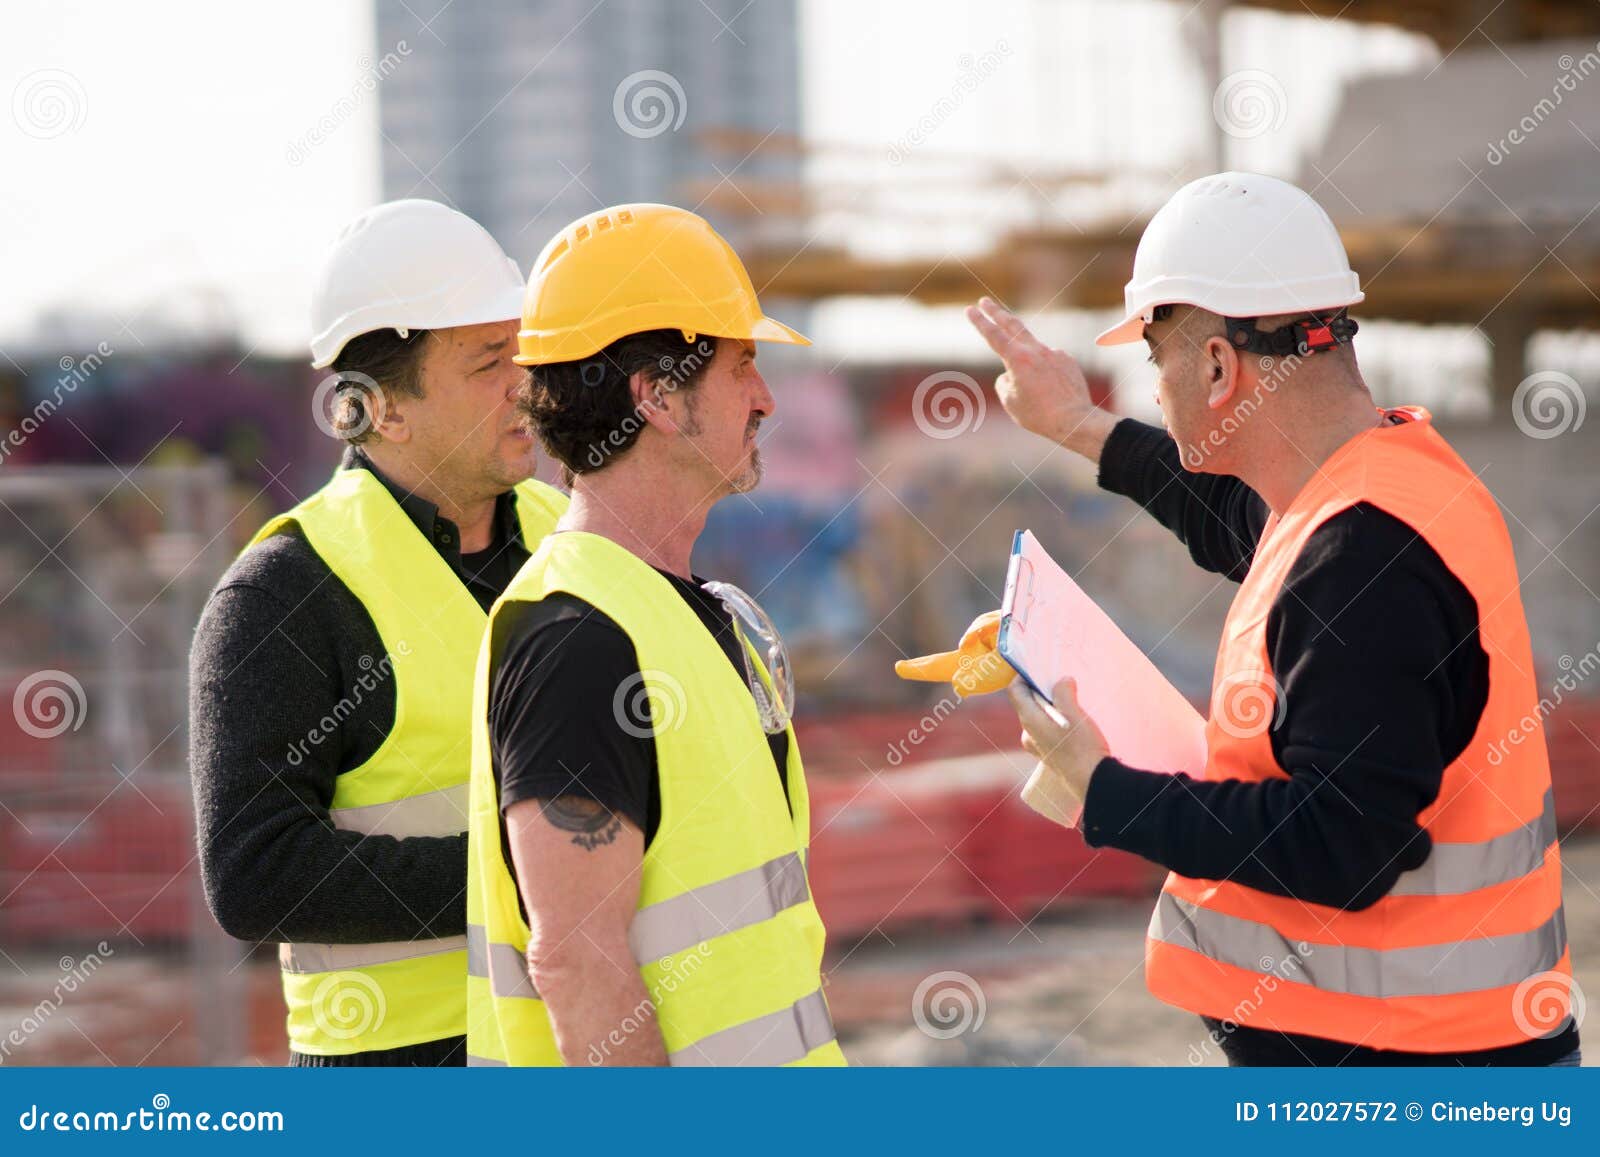 engineers and construction workers at work